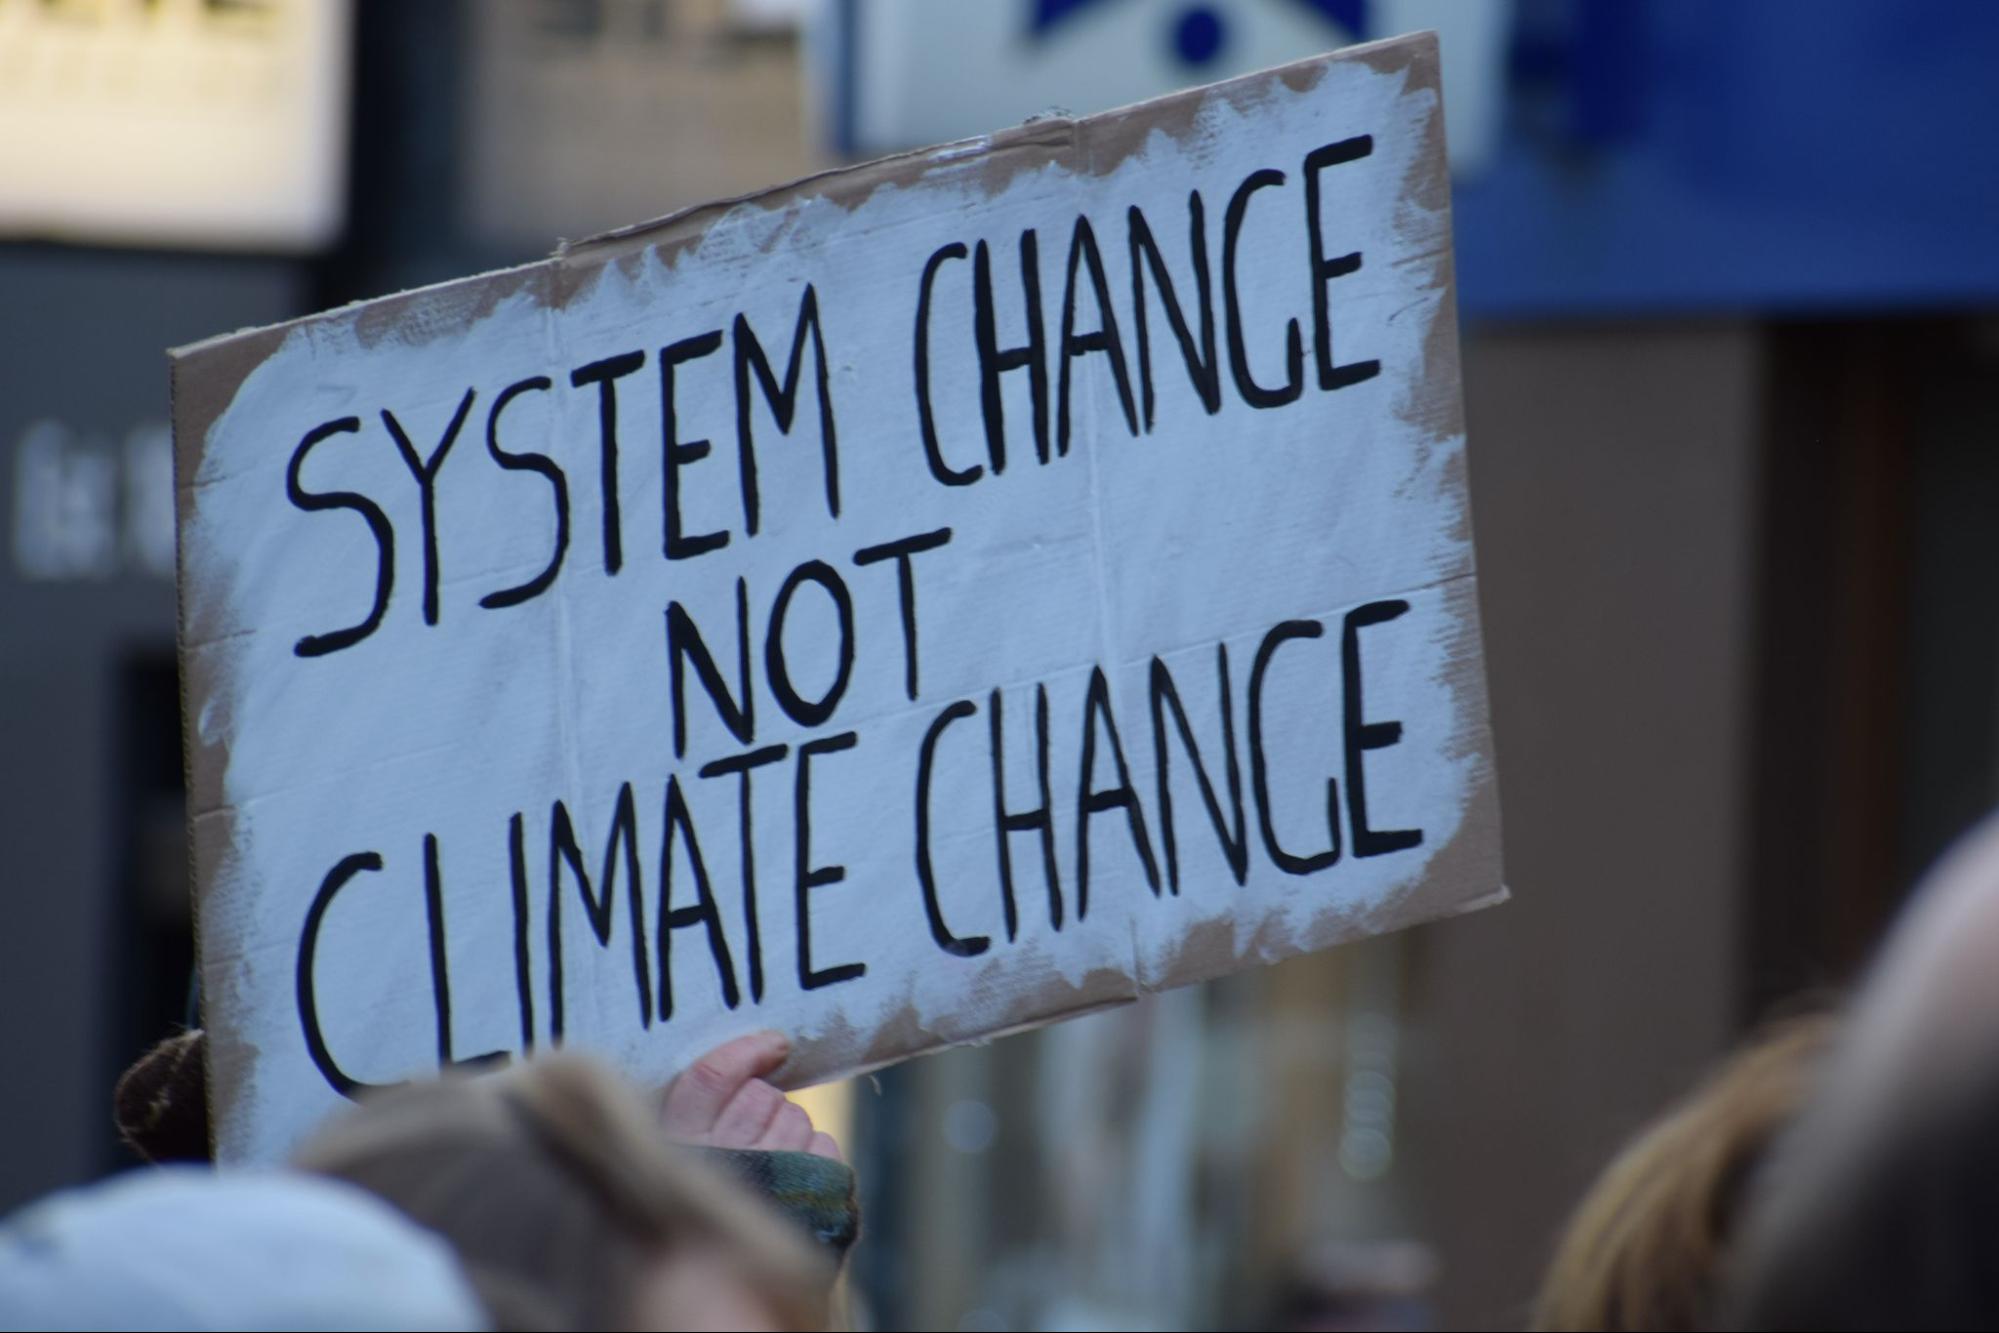 Cardboard sign held aloft with painted words stating: "System change not climate change"